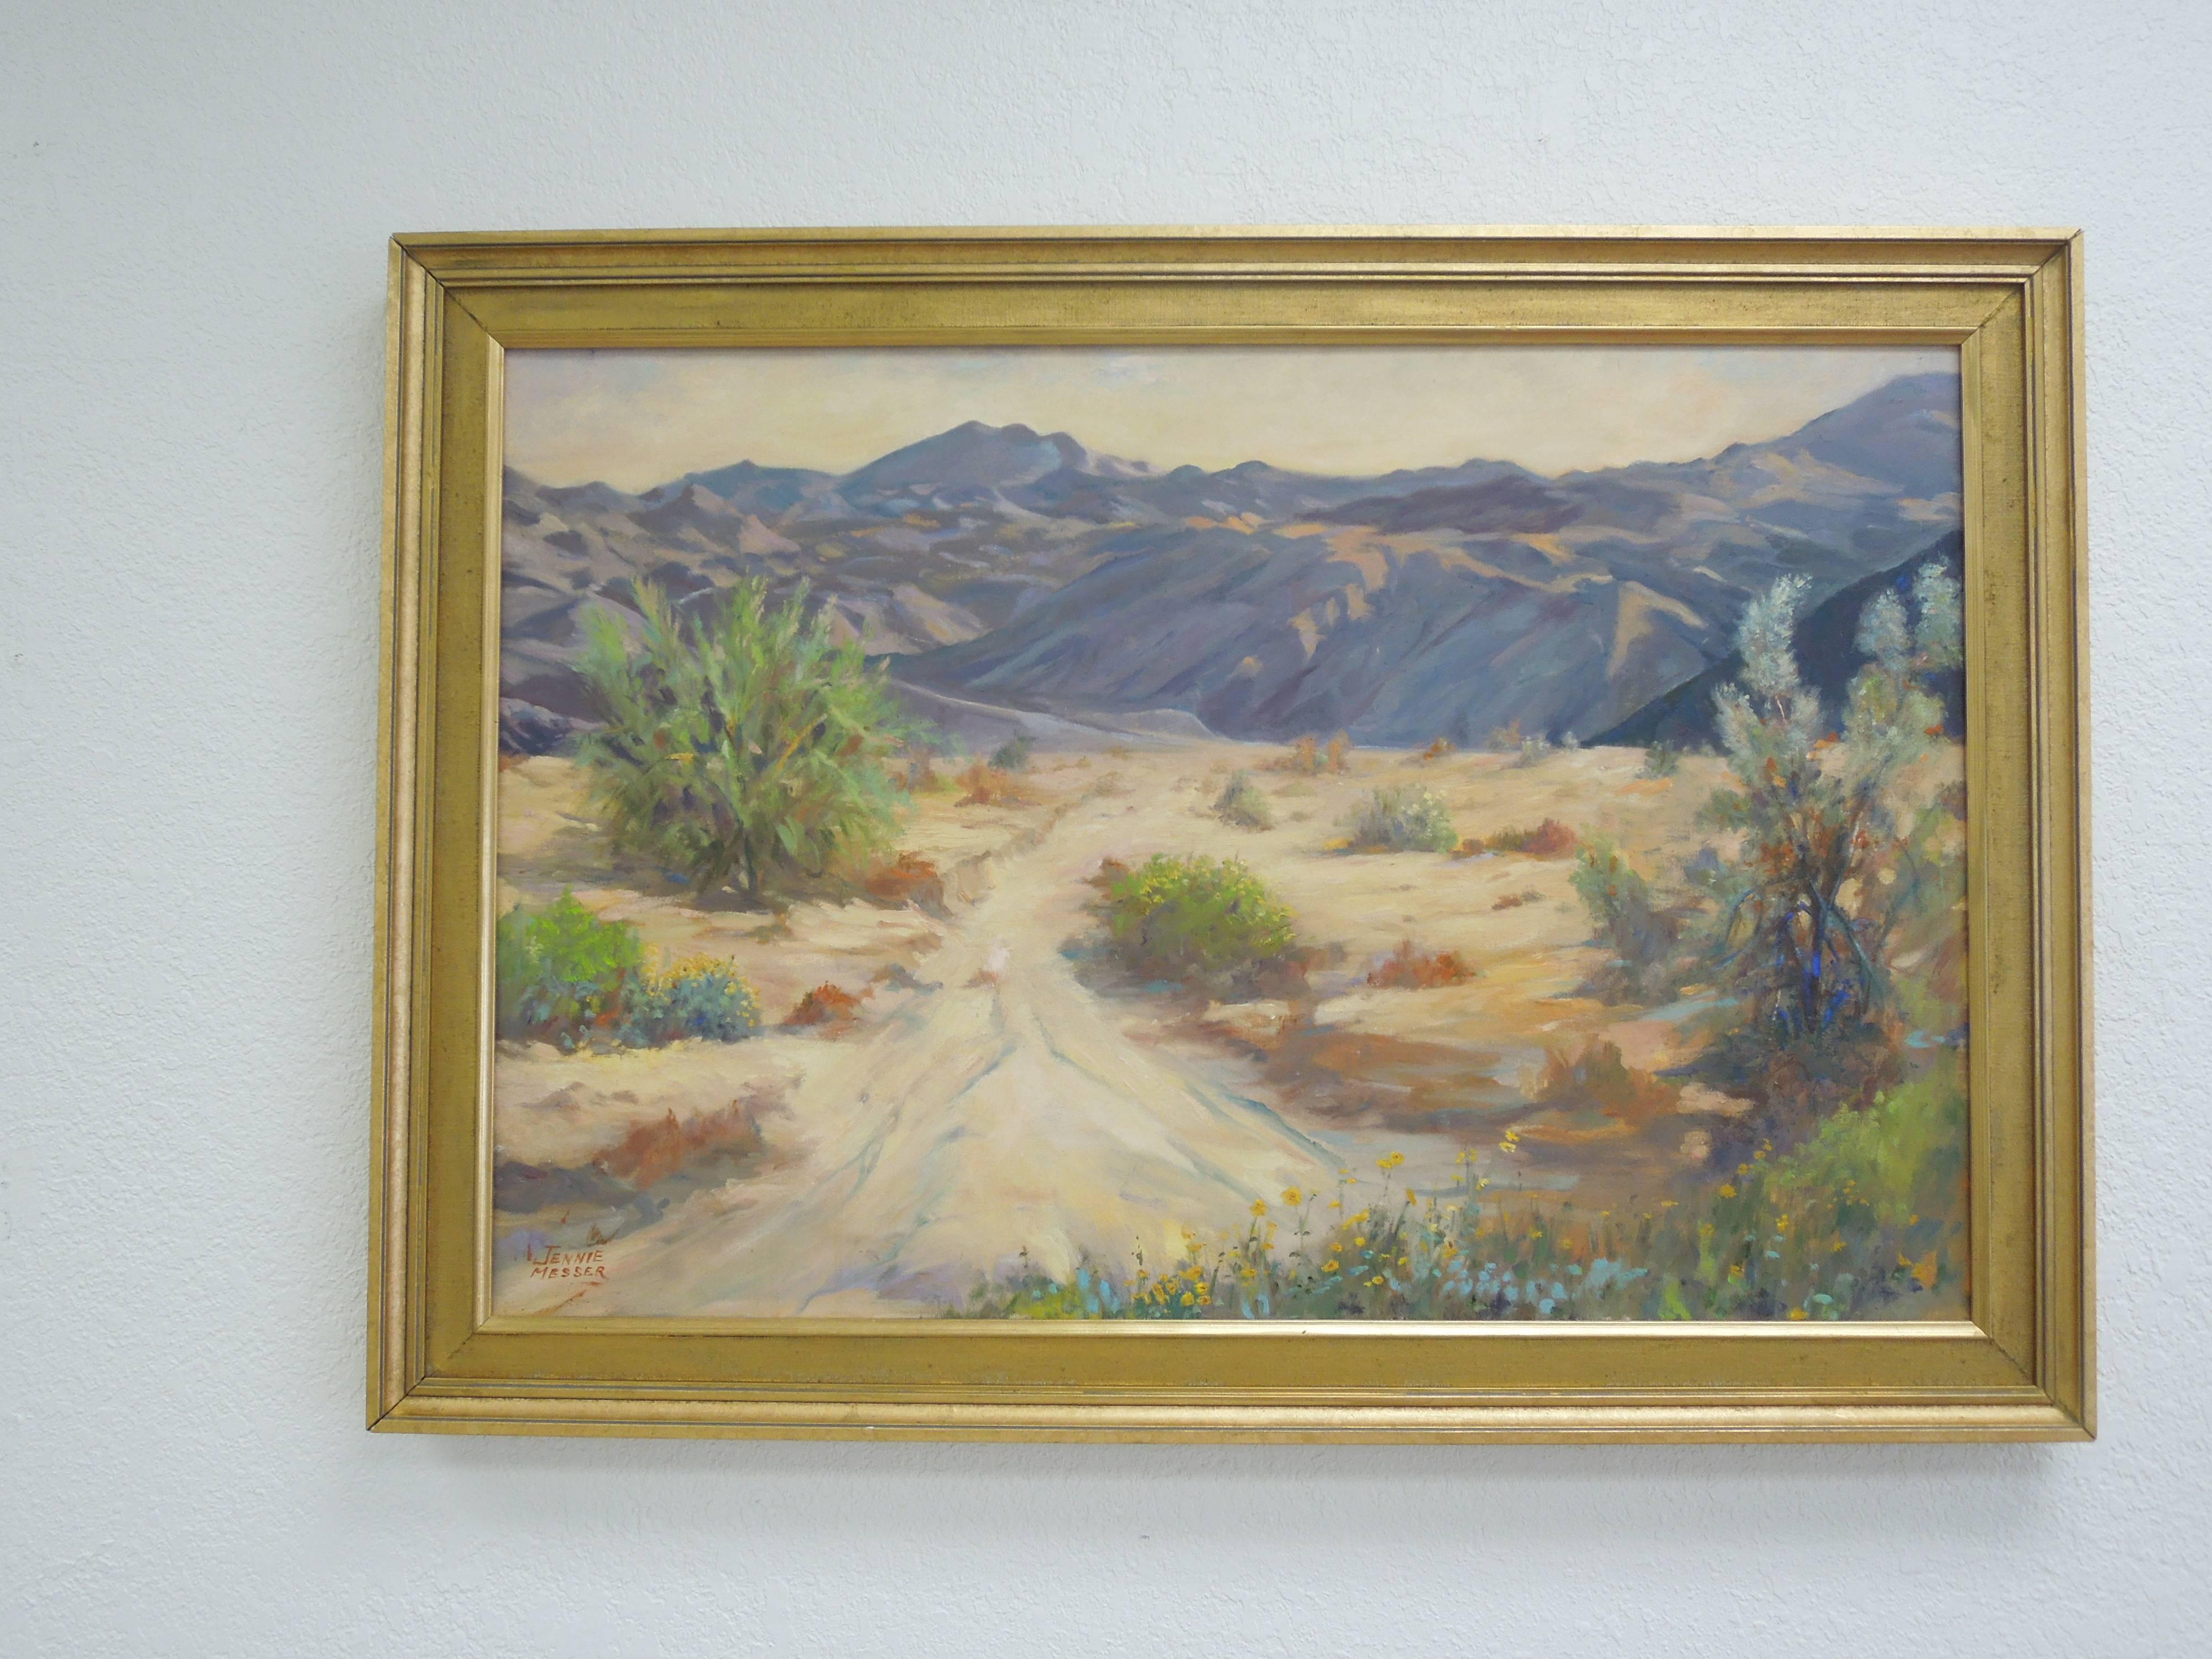 A lovely dimensional oil on canvas painting in soothing, relaxing colors of the Palm Springs desert. Obtains original gold wood frame.